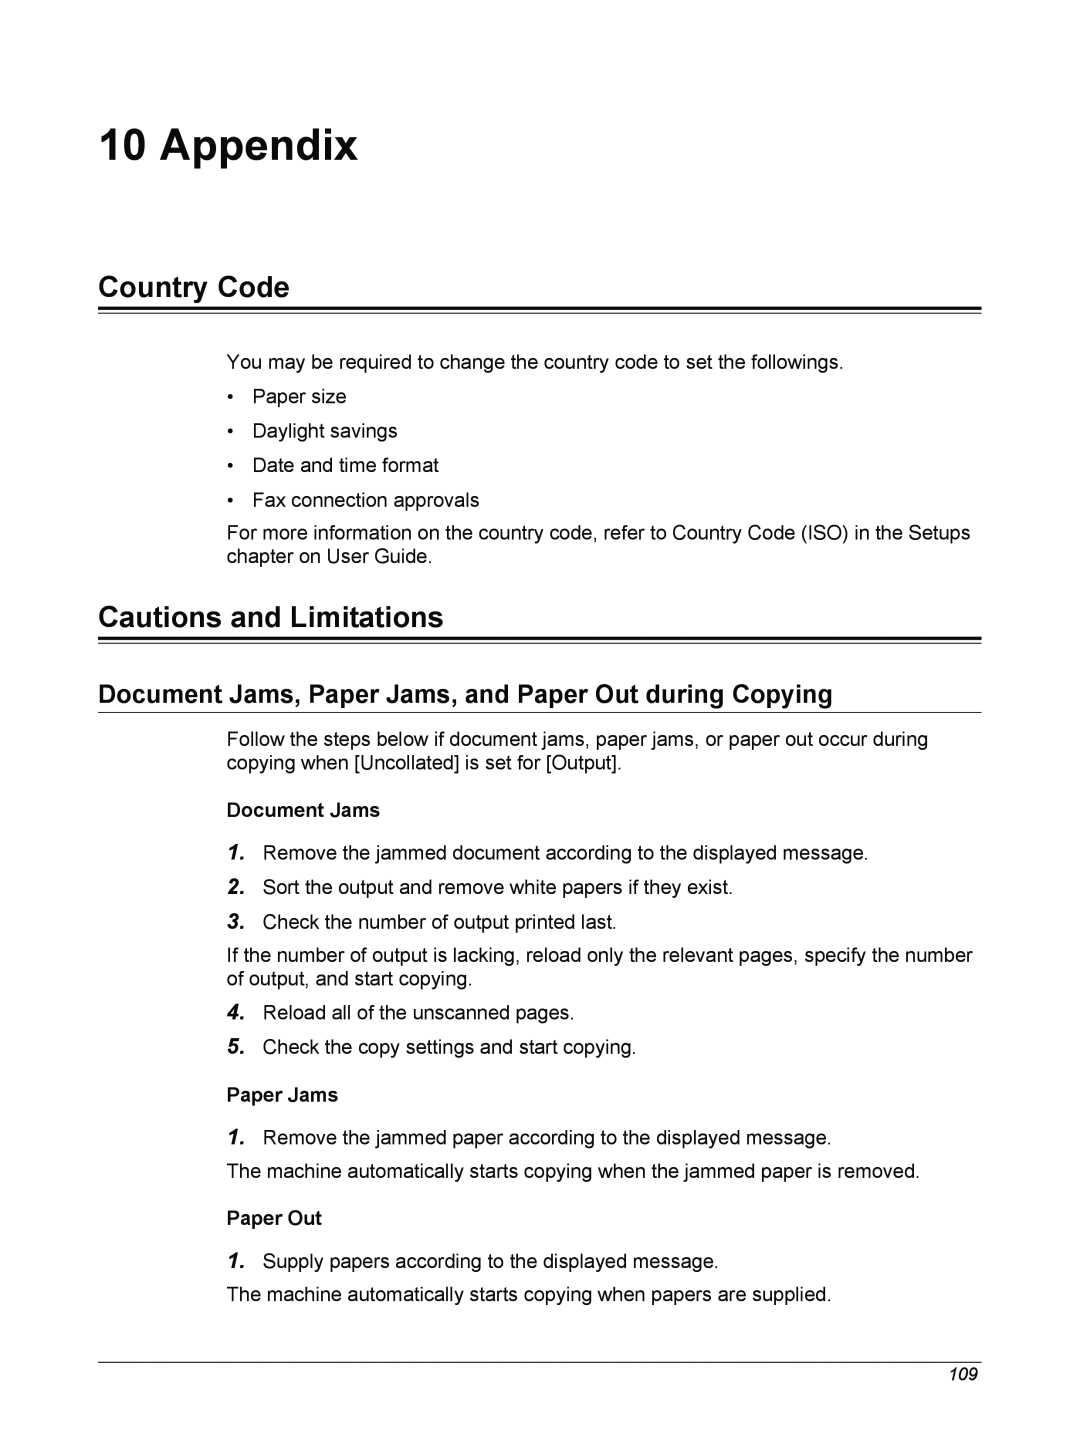 Xerox M118i Appendix, Country Code, Cautions and Limitations, Document Jams, Paper Jams, and Paper Out during Copying 